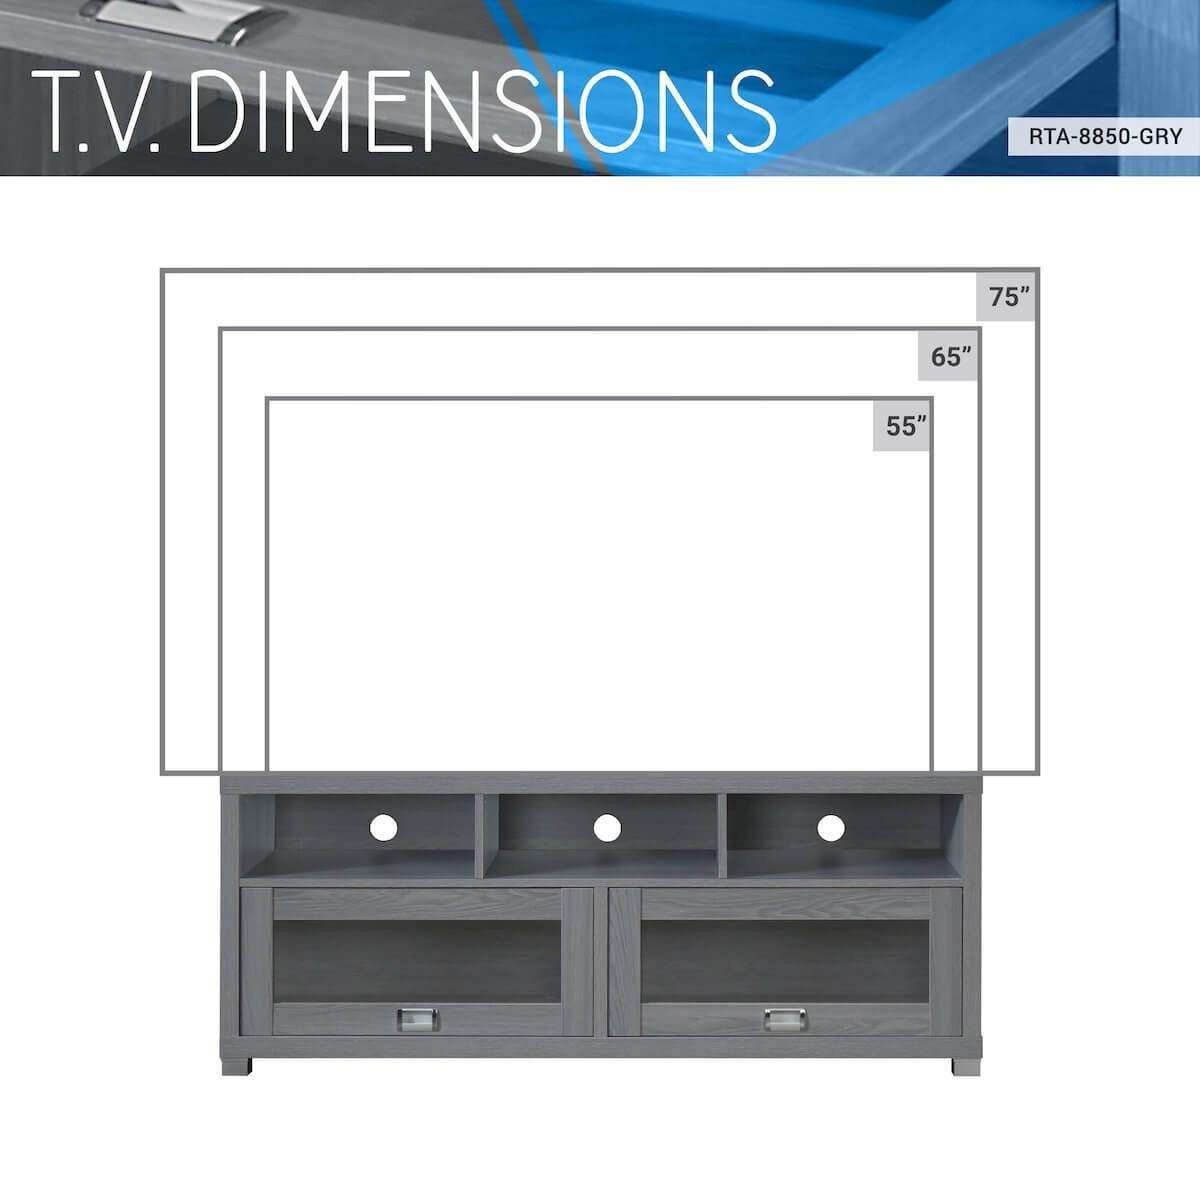 Techni Mobili Gray Durbin TV Stand for TVs up to 65" RTA-8850-GRY TV Dimensions